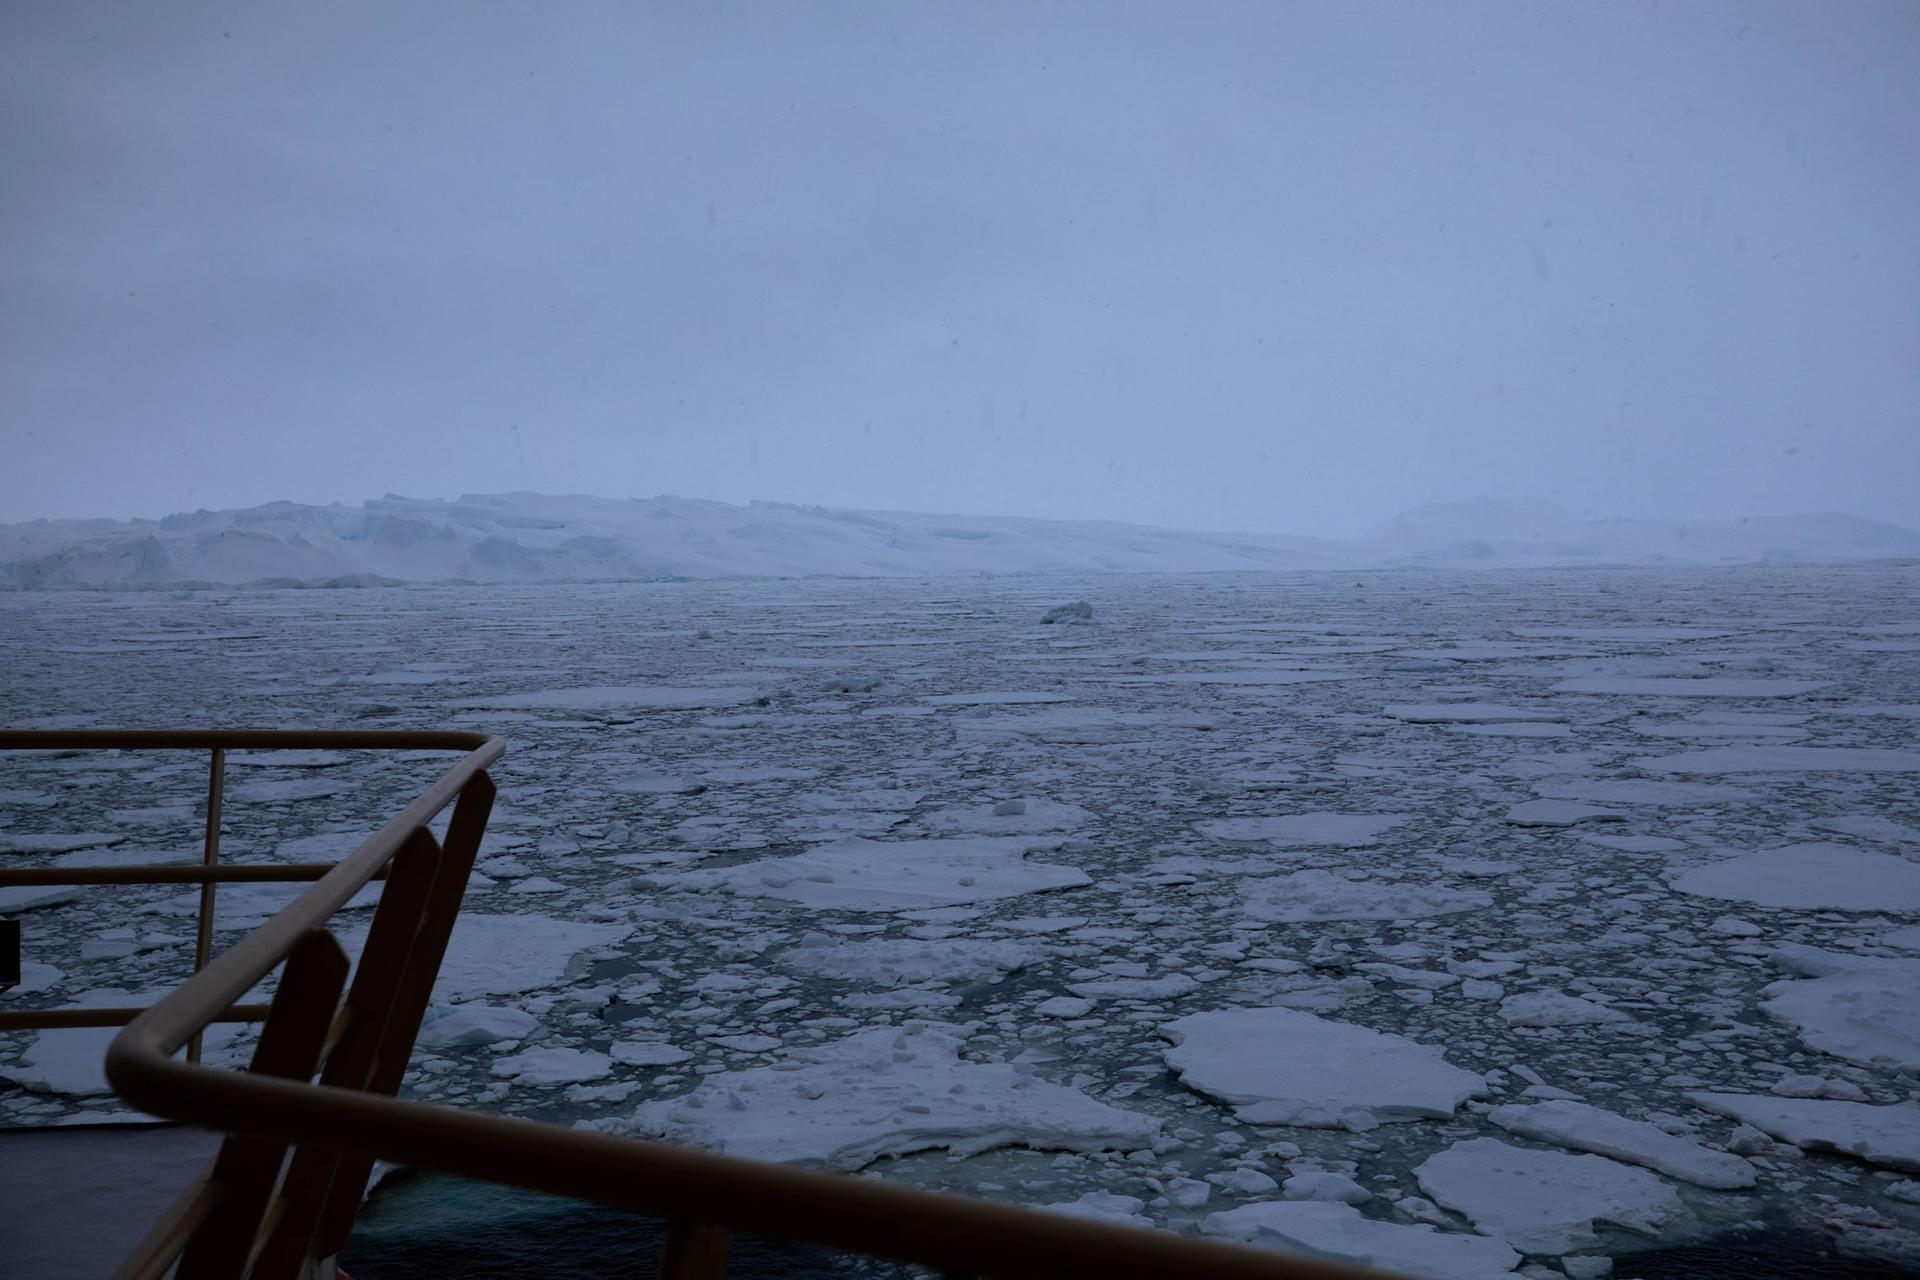 The brown railing of the research vessel is shown in the near ground with larger pancake ice formations in the Amundsen Sea.